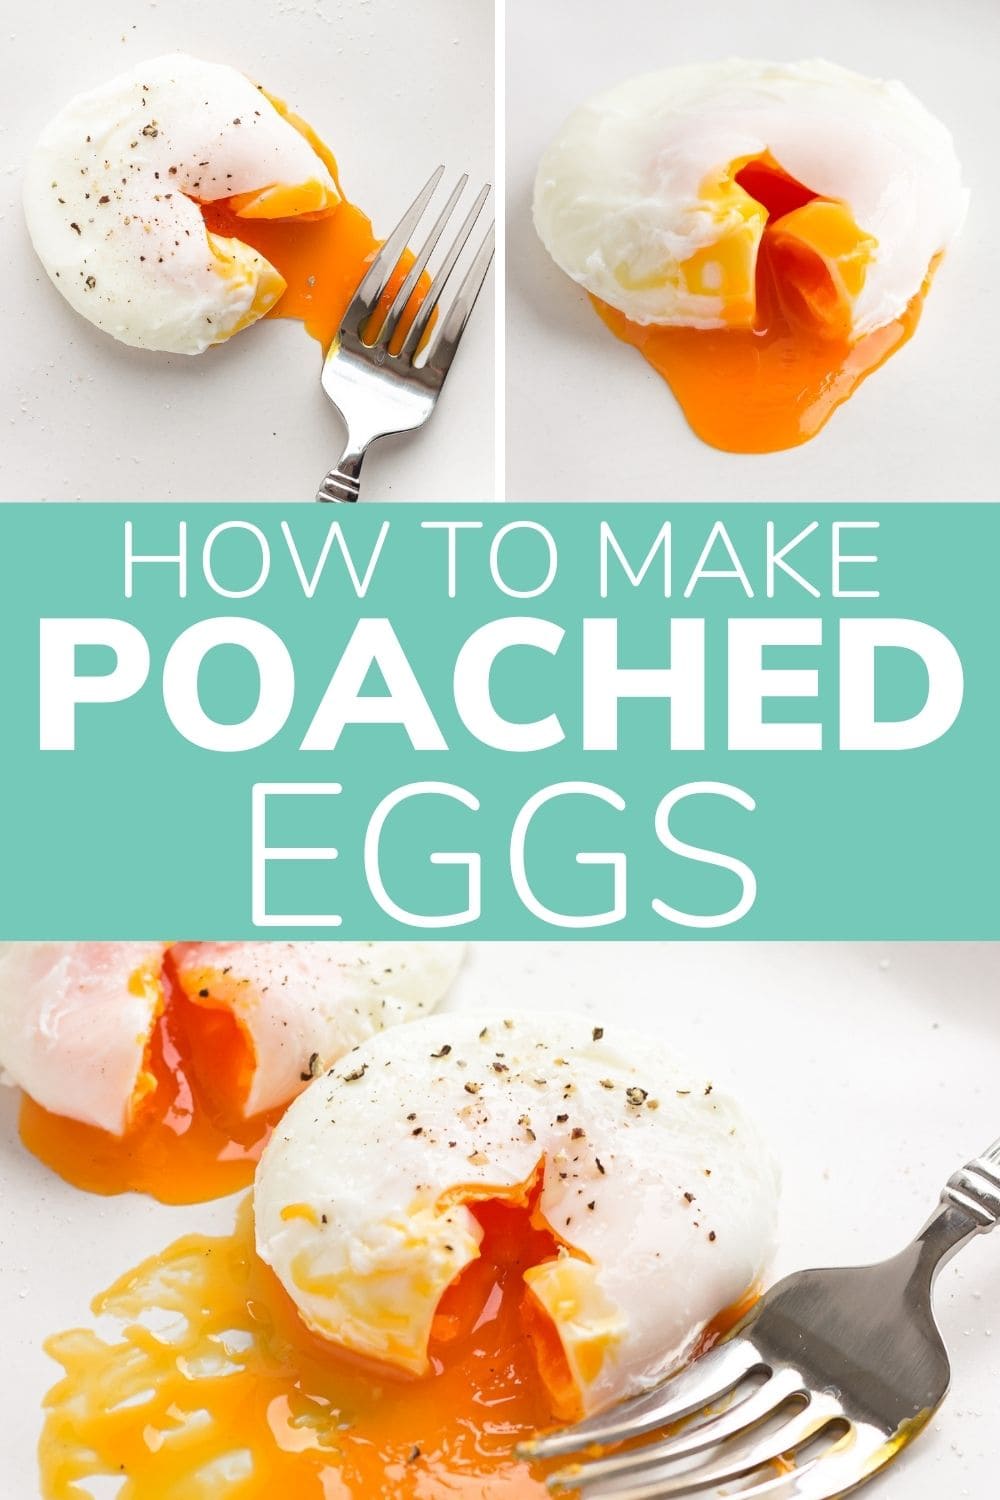 Collage graphic showing three pictures of poached eggs and text overlay "How To Make Poached Eggs".